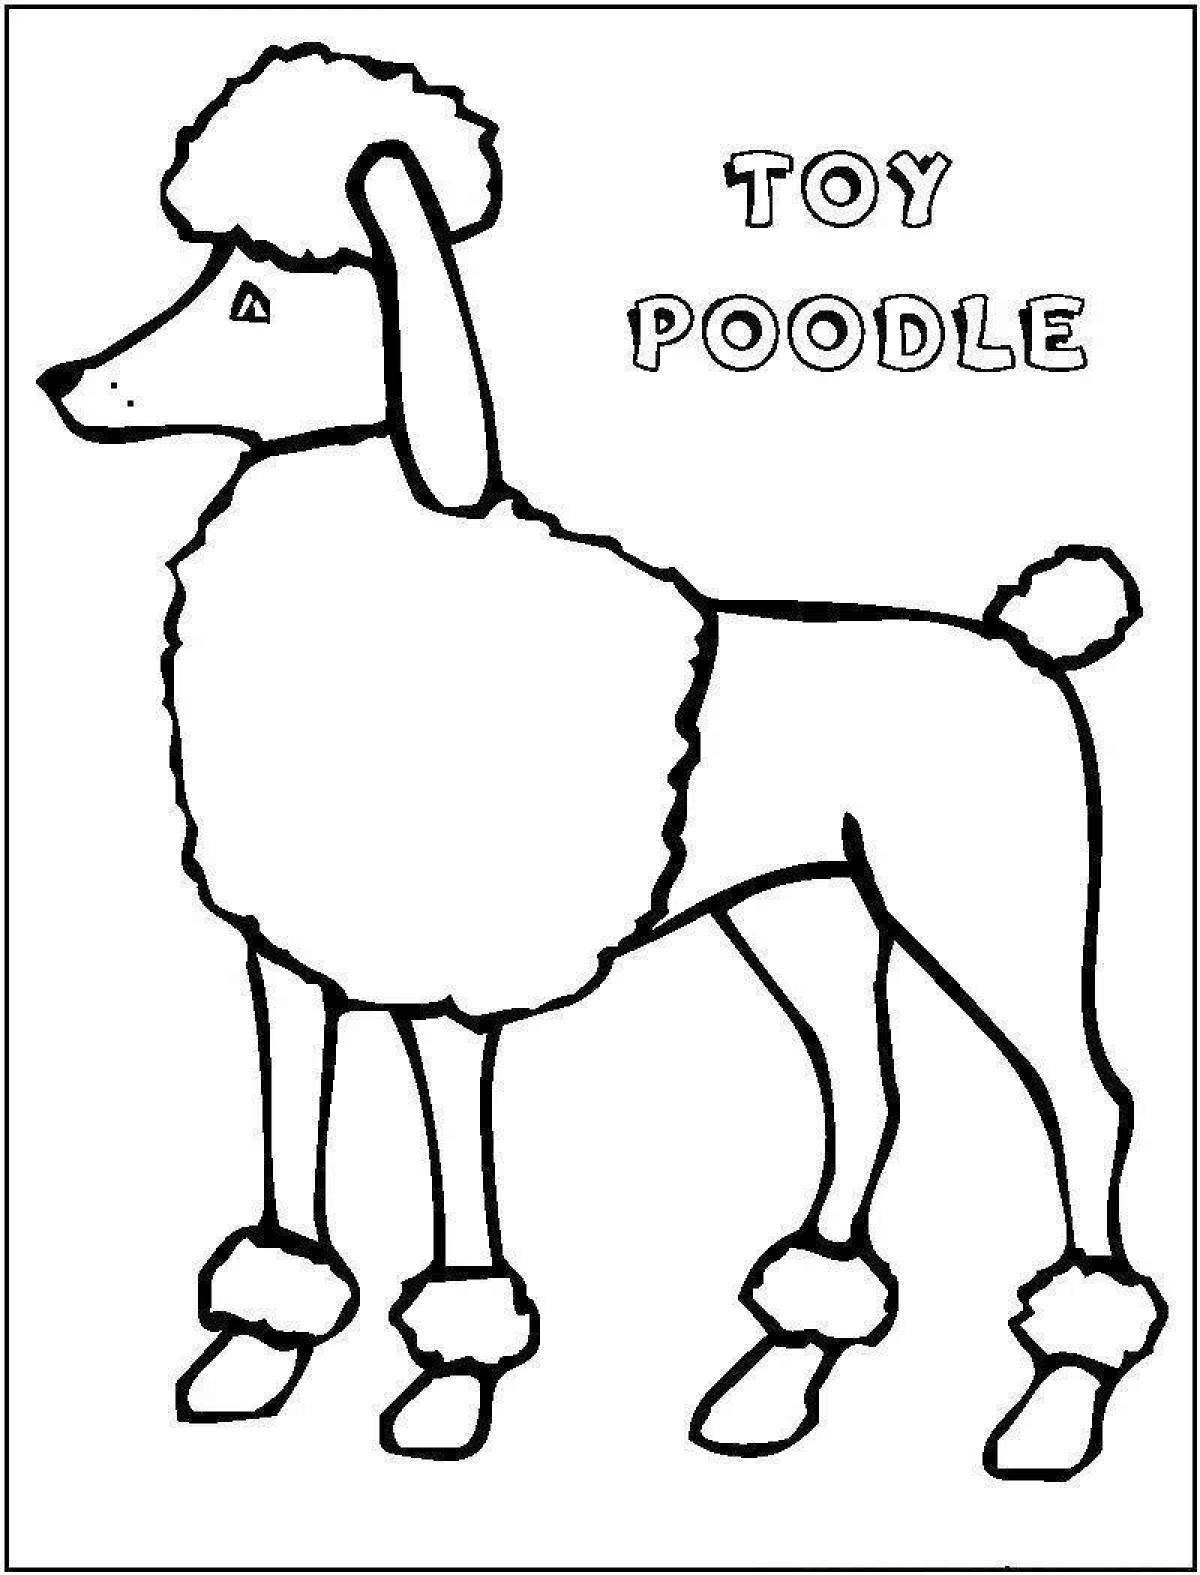 Live poodle coloring pages for kids